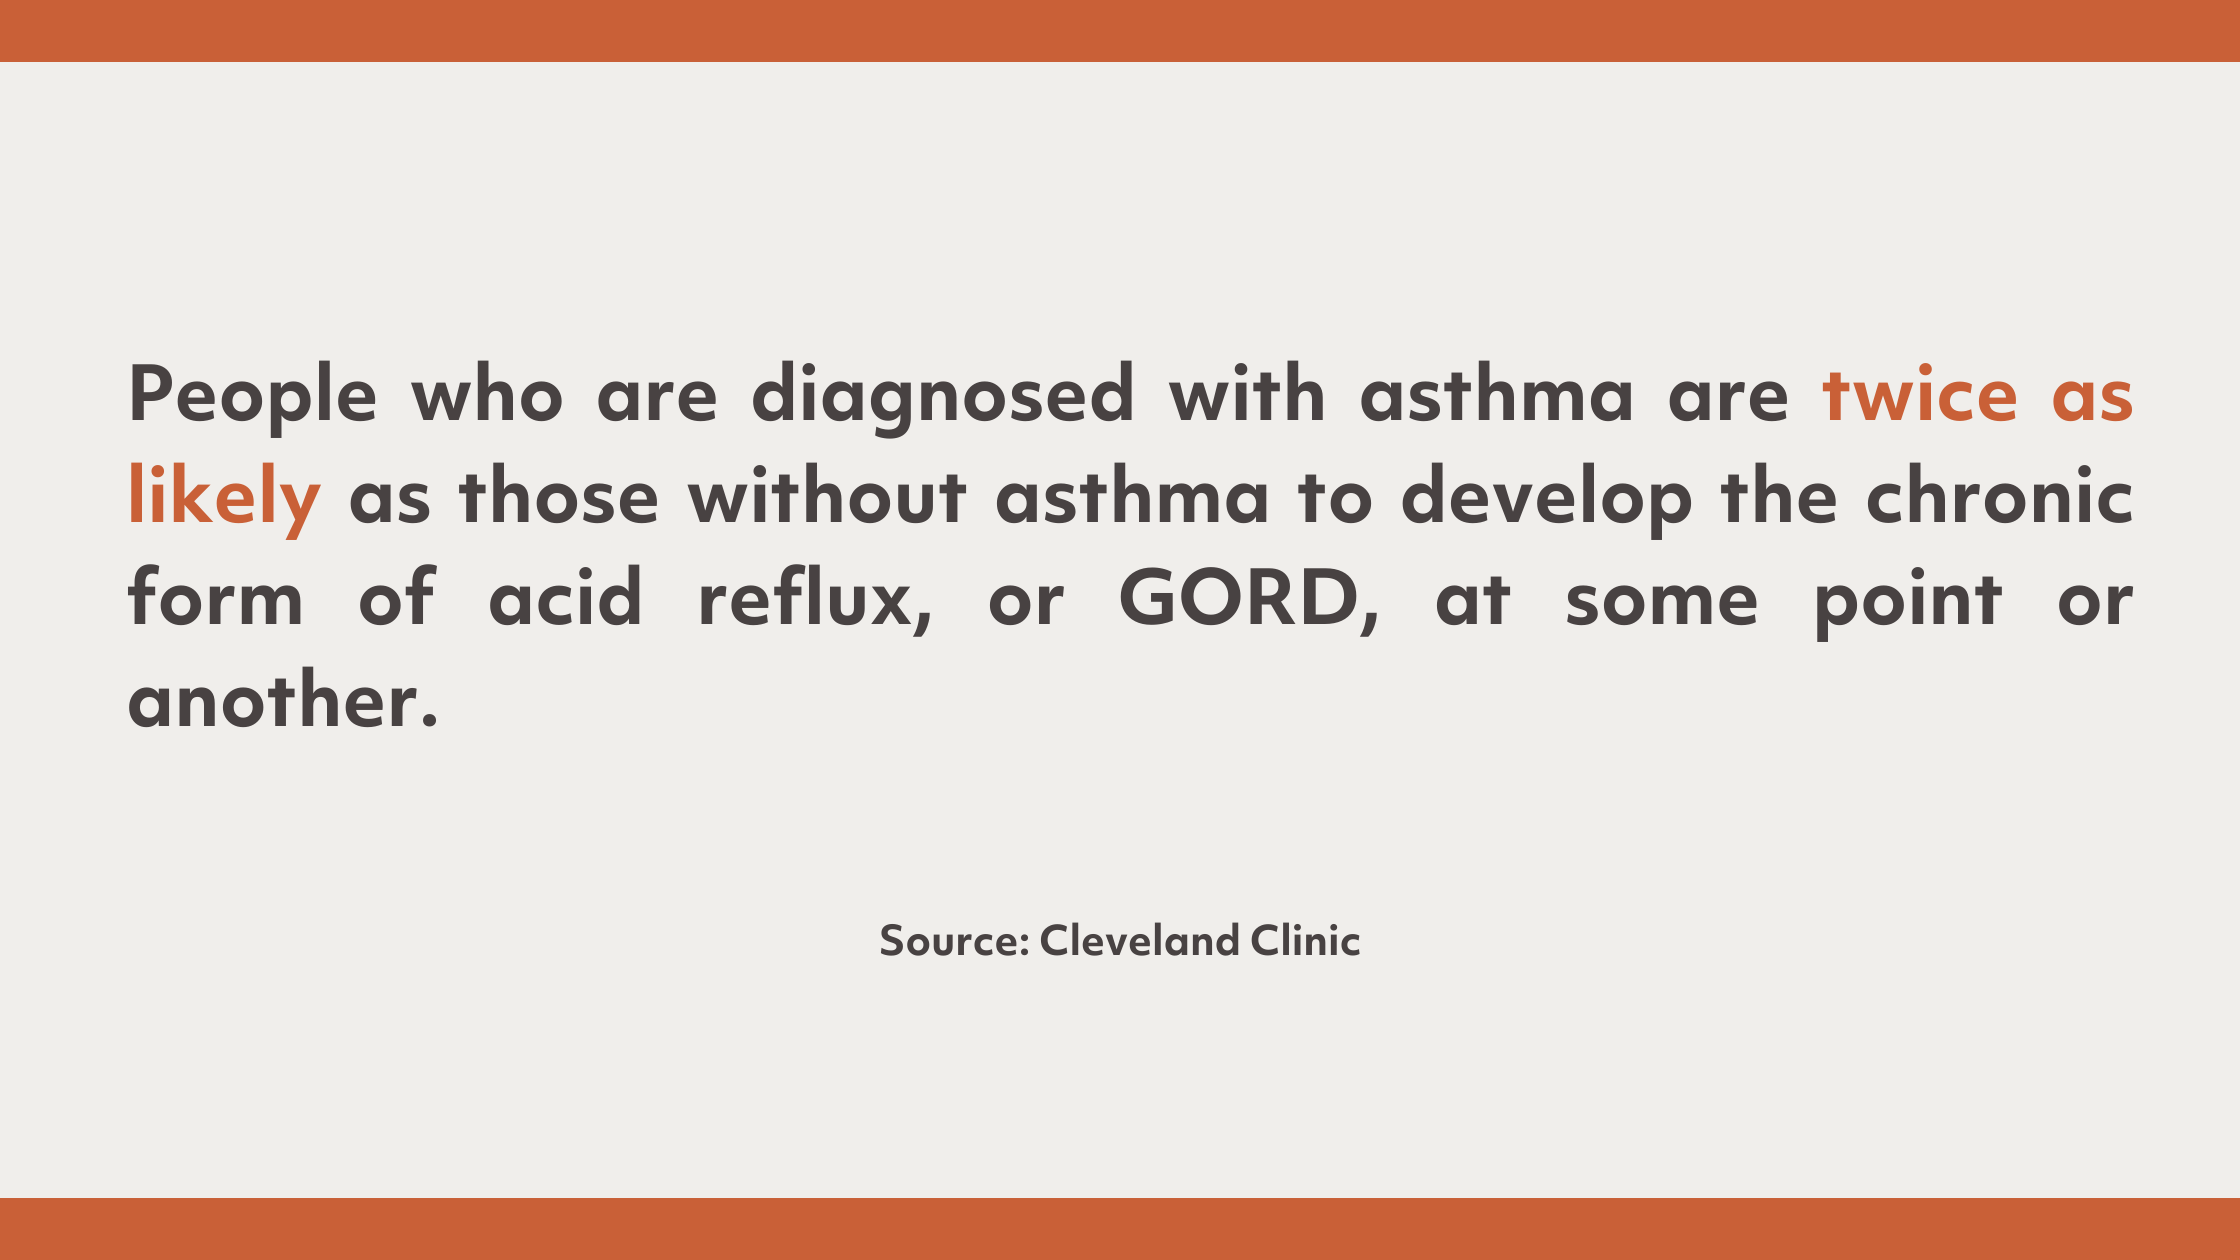 People who are diagnosed with asthma are twice as likely as those without asthma to develop the chronic form of acid reflux